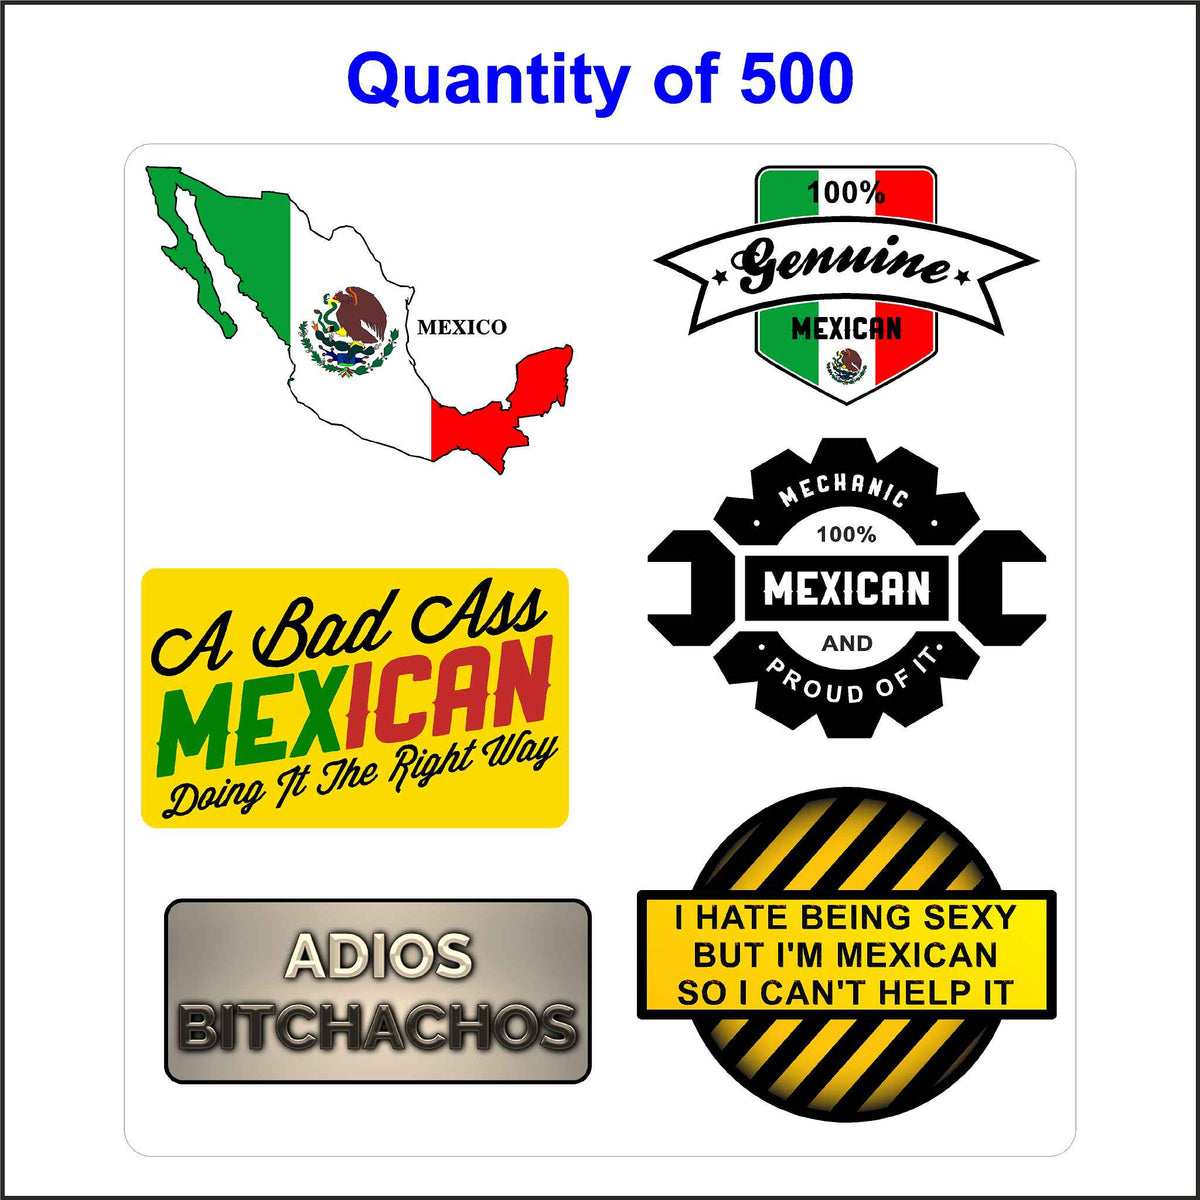 Funny Mexican Hard Hat Stickers, Bad Ass Mexican, Adios Bitchachos. 500 Quantity.